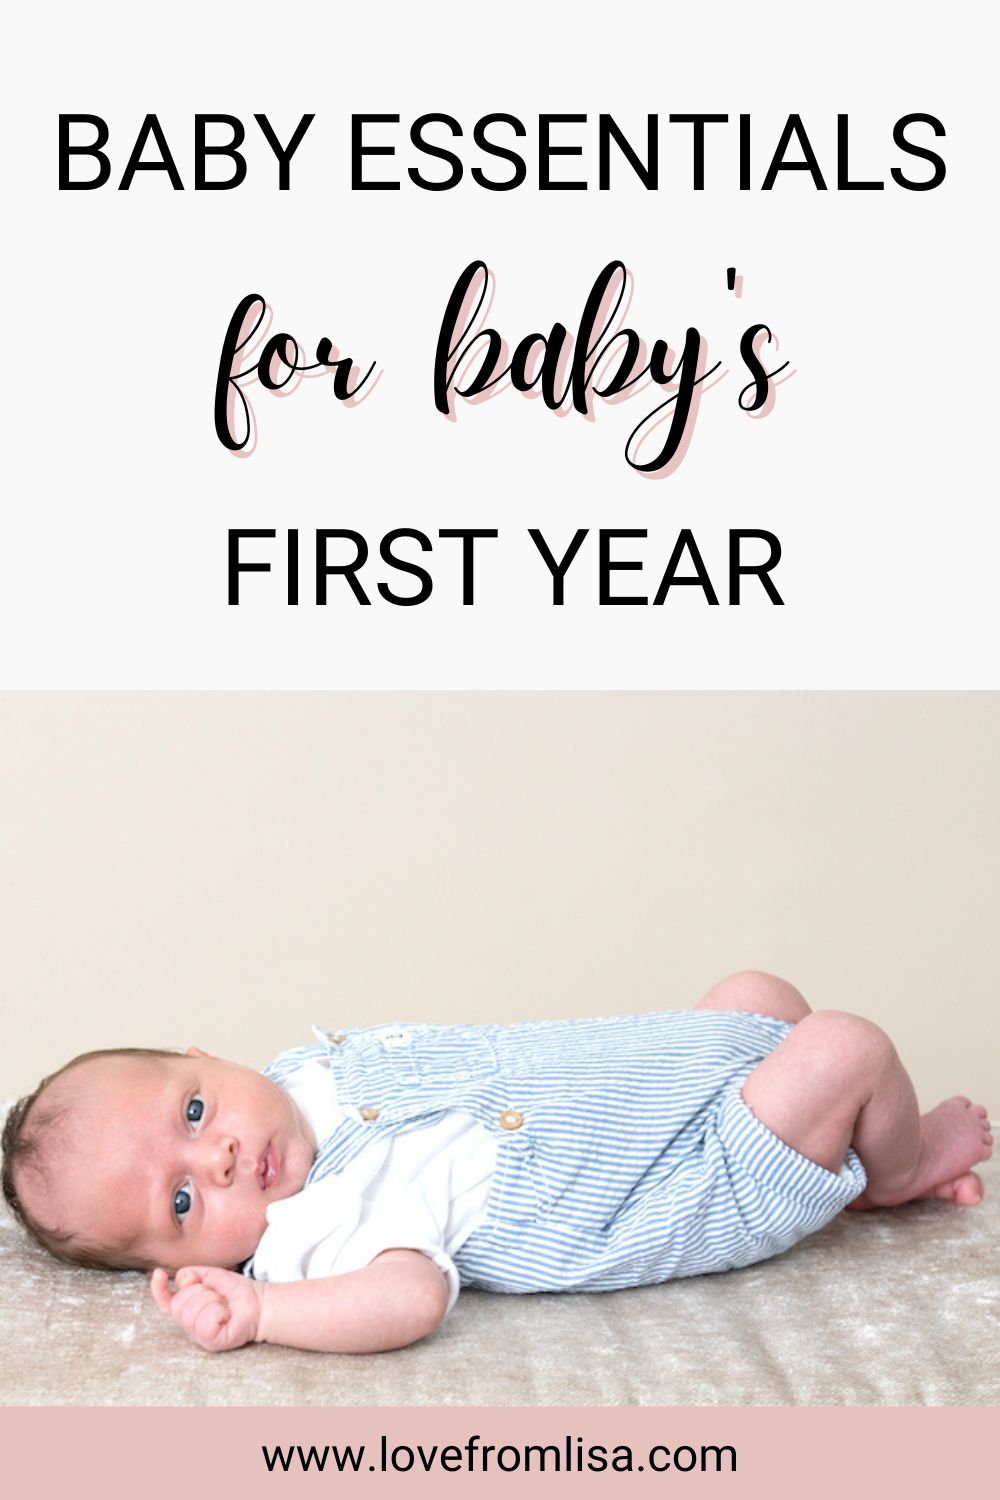 Baby essentials for baby's first year